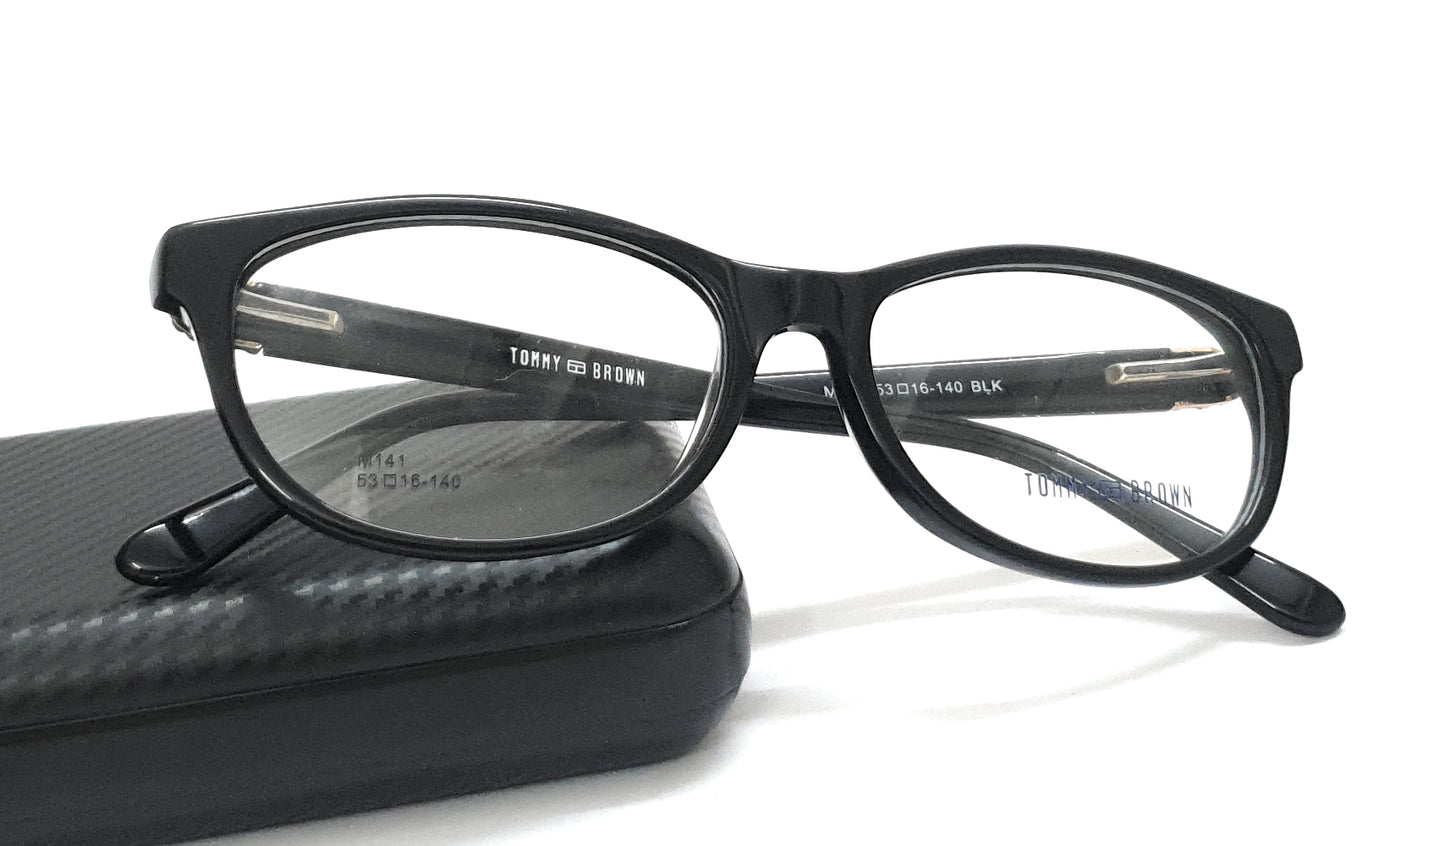 Tommy Brown Fashionable Eyeglasses M141 Black Spectacle